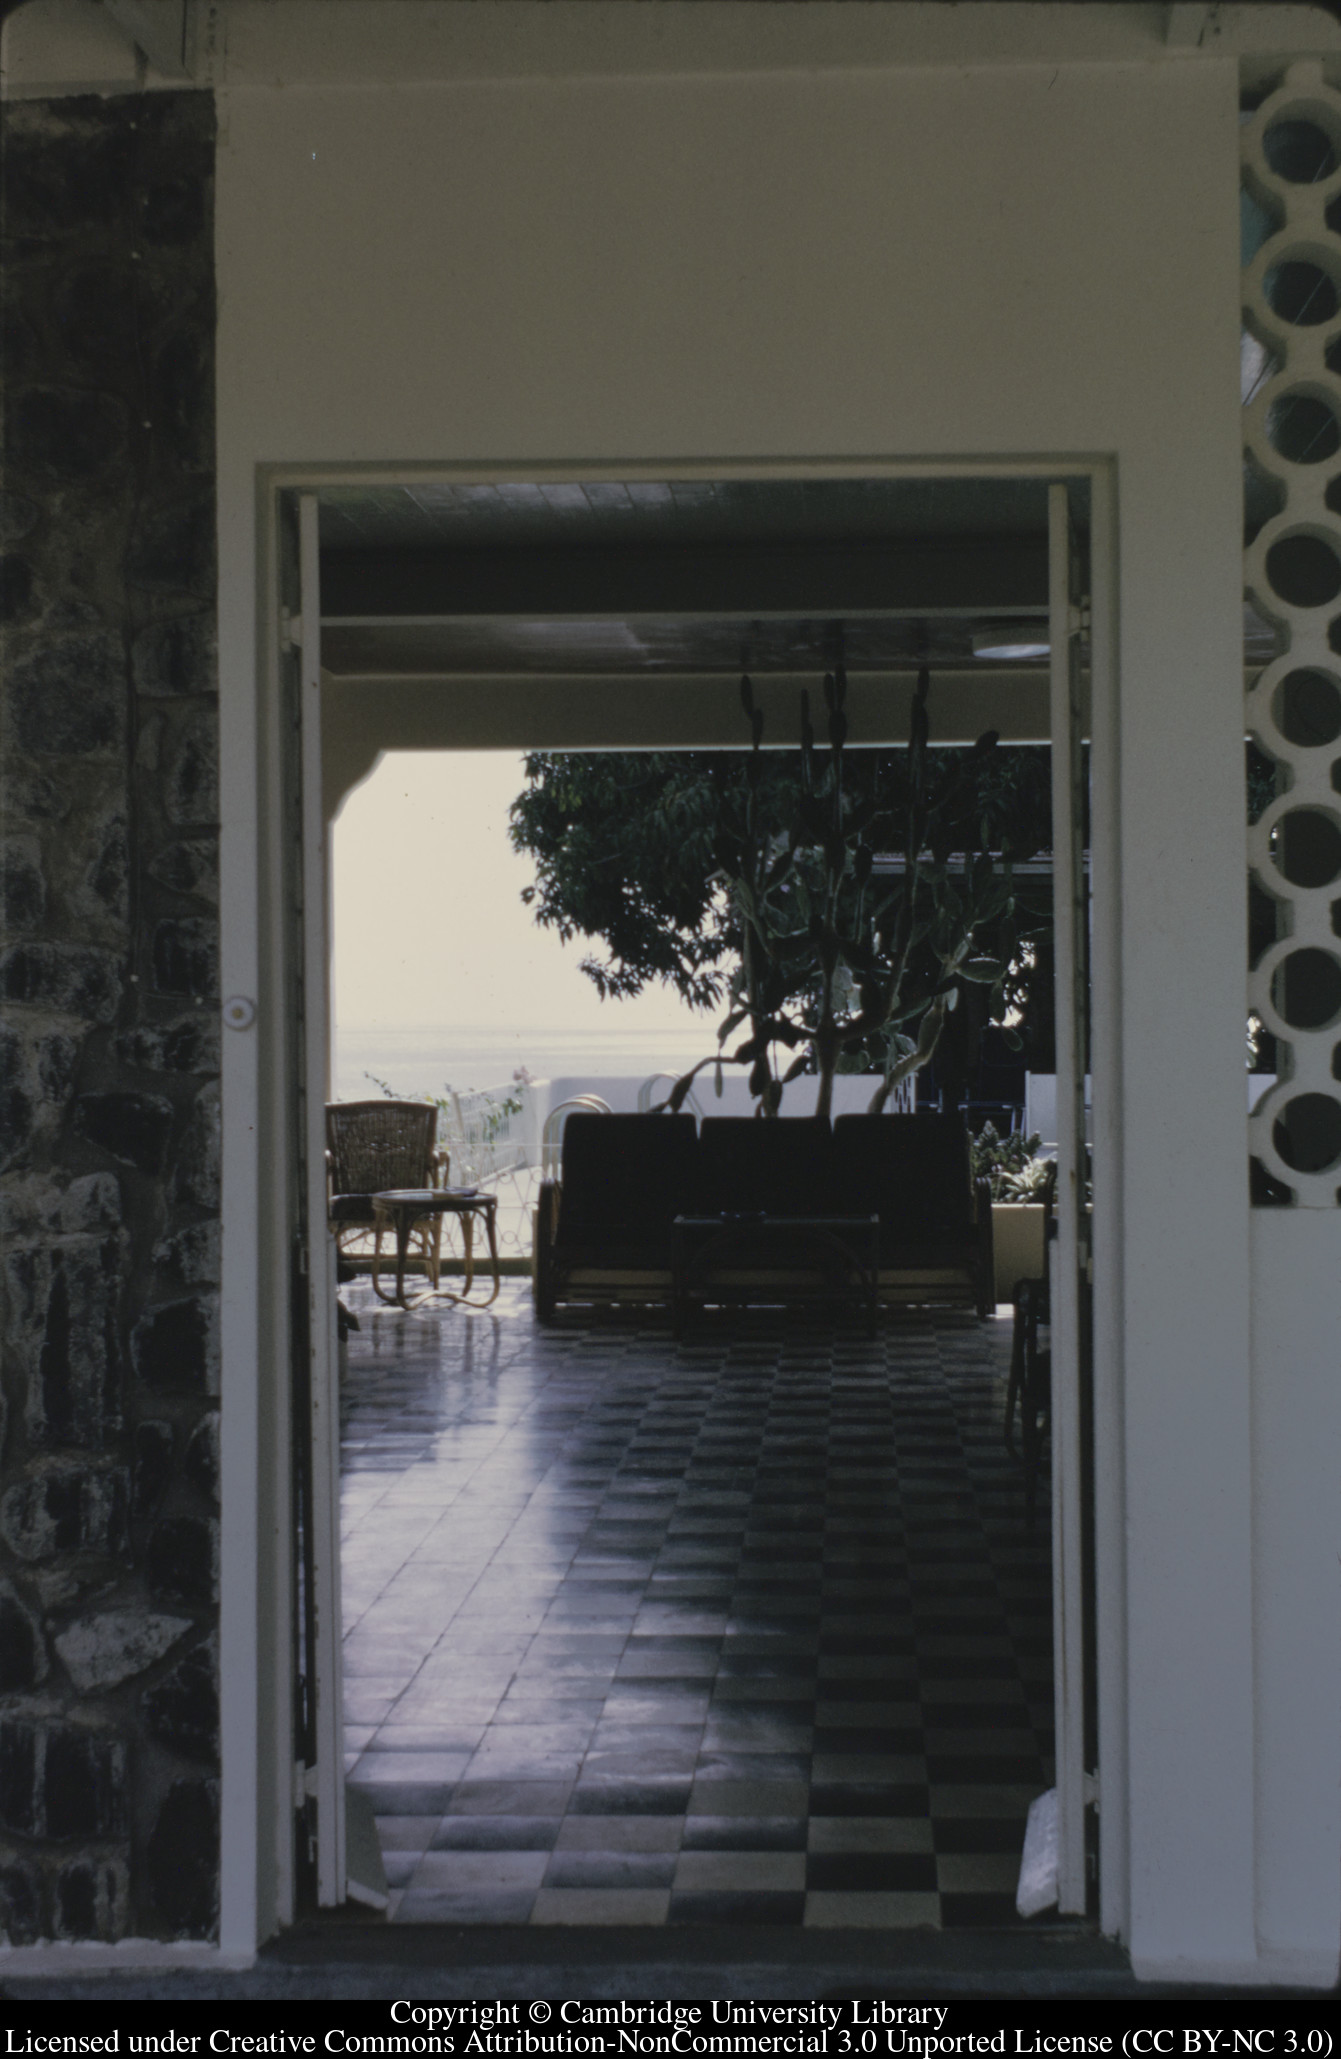 C [Ciceron] : entrance - sofa moved as for buffet, 1973-02